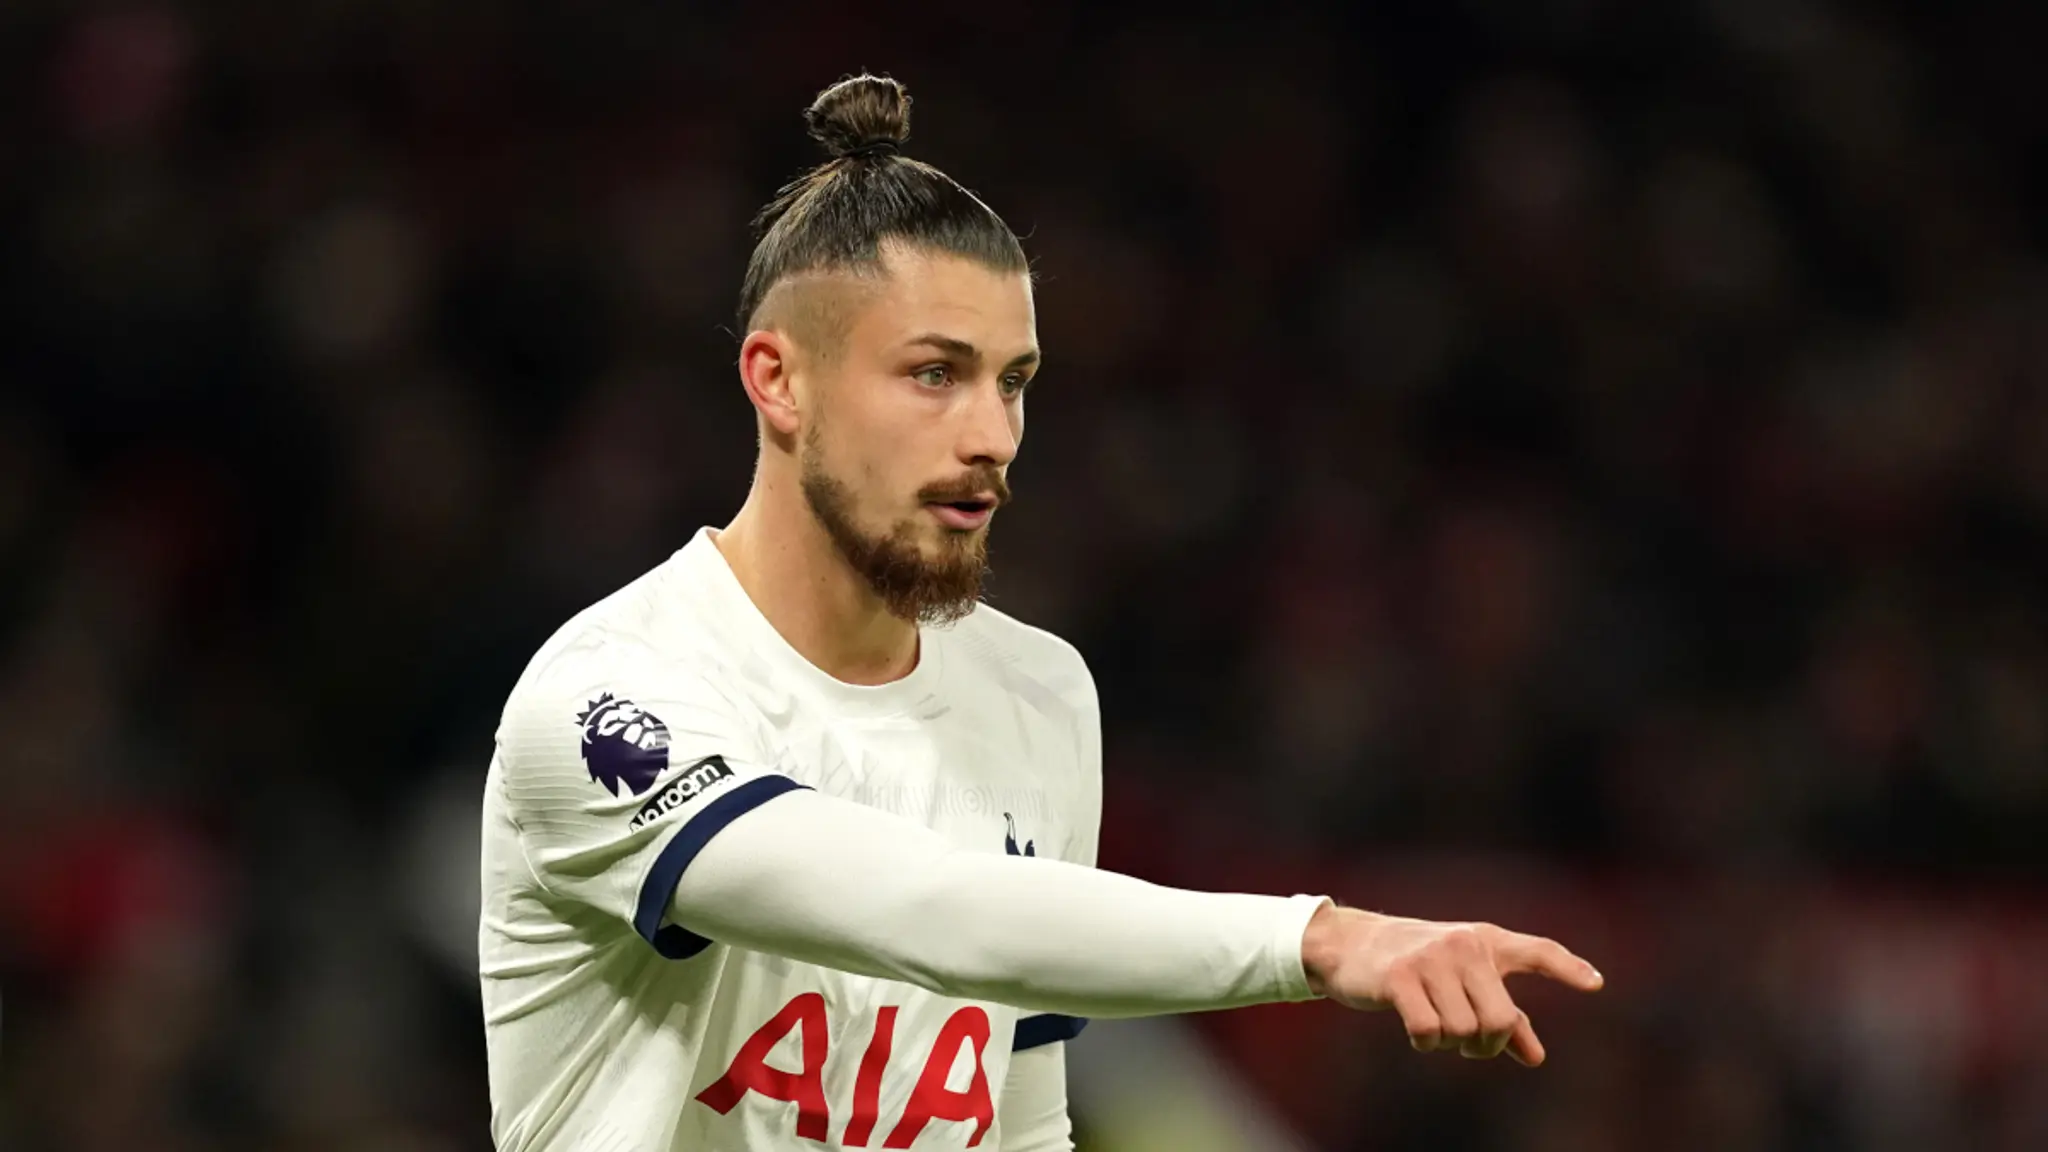 Tottenham bested Napoli in the race to acquire Radu Dragusin in January, but the center-back hasn’t played much since moving to the Premier League.